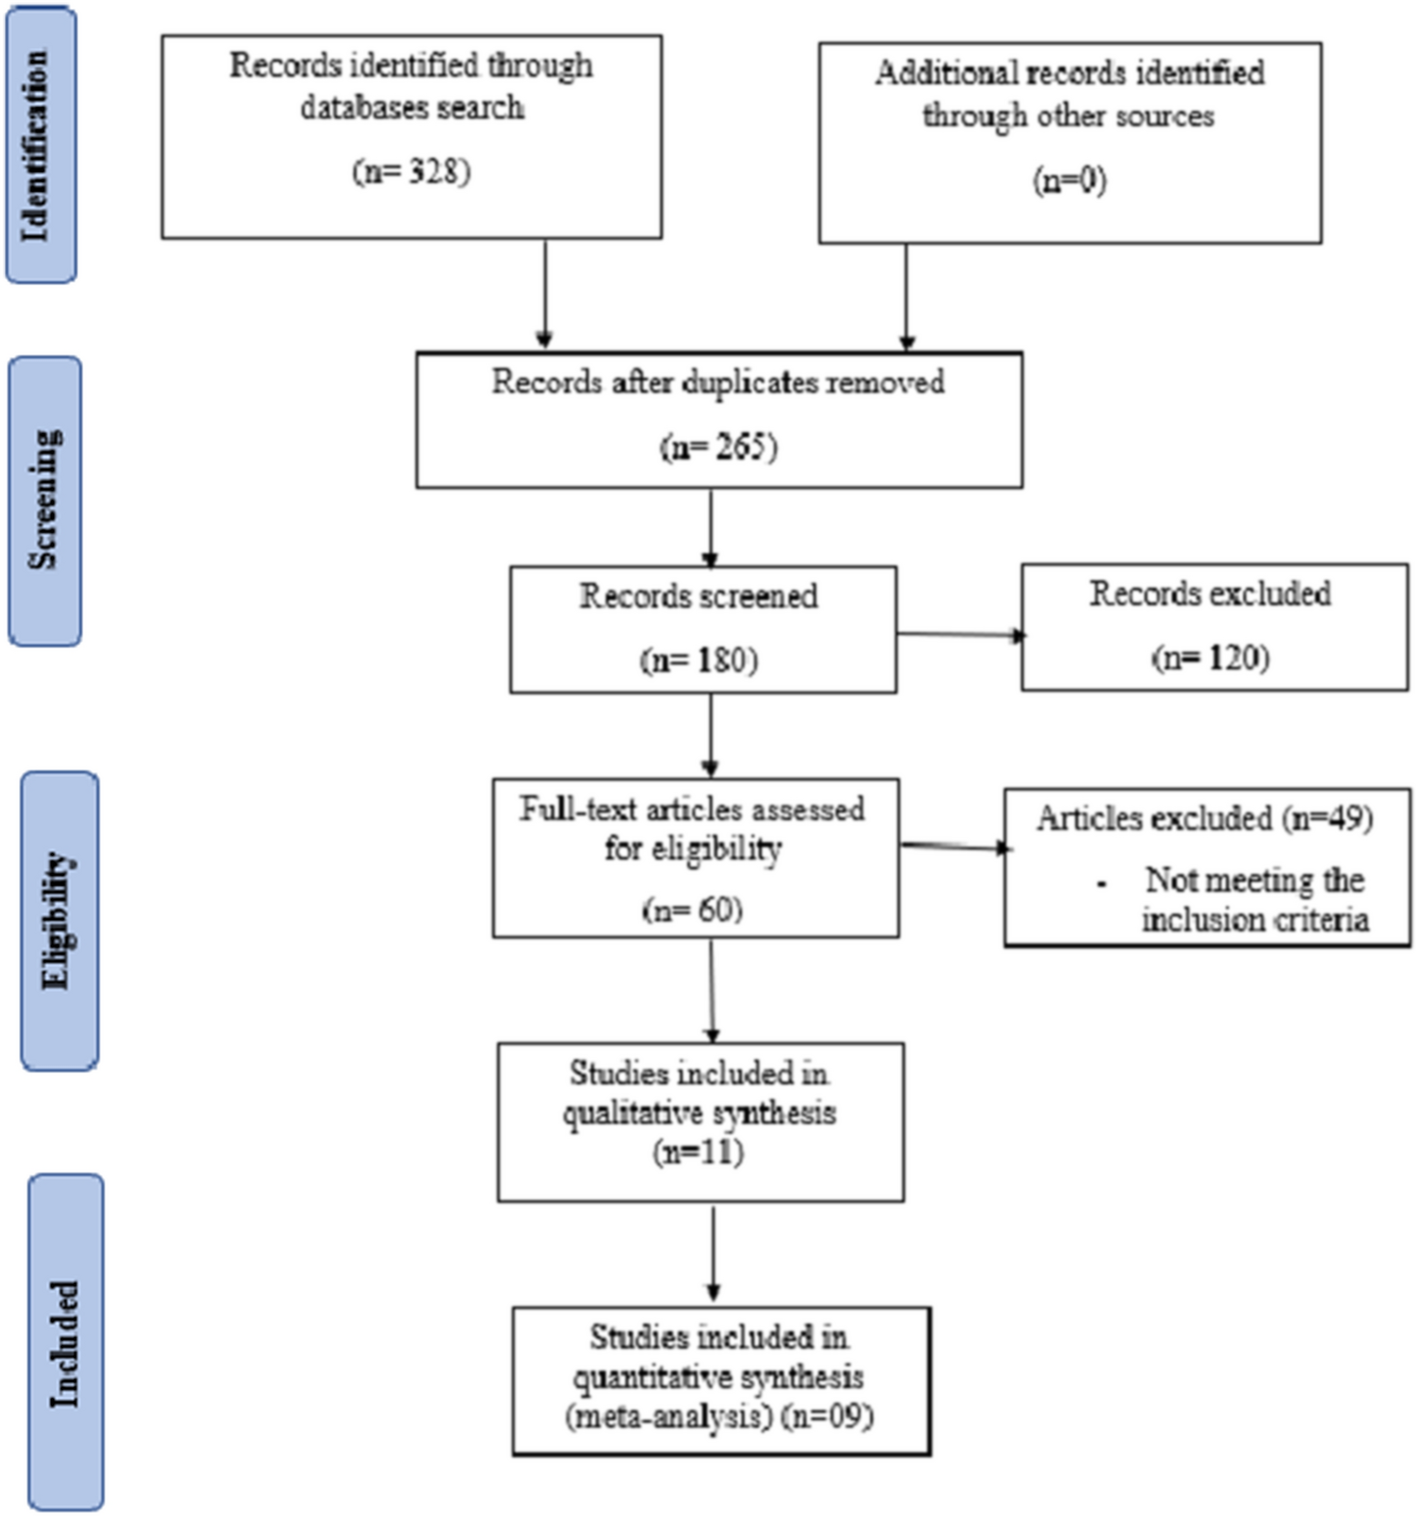 Comparative Evaluation of Sinus Complication and Survival Rates of Quad Zygoma versus Bizygoma in Combination with two Regular Implants in Atrophic Maxilla: A Systematic Review and Meta-Analysis